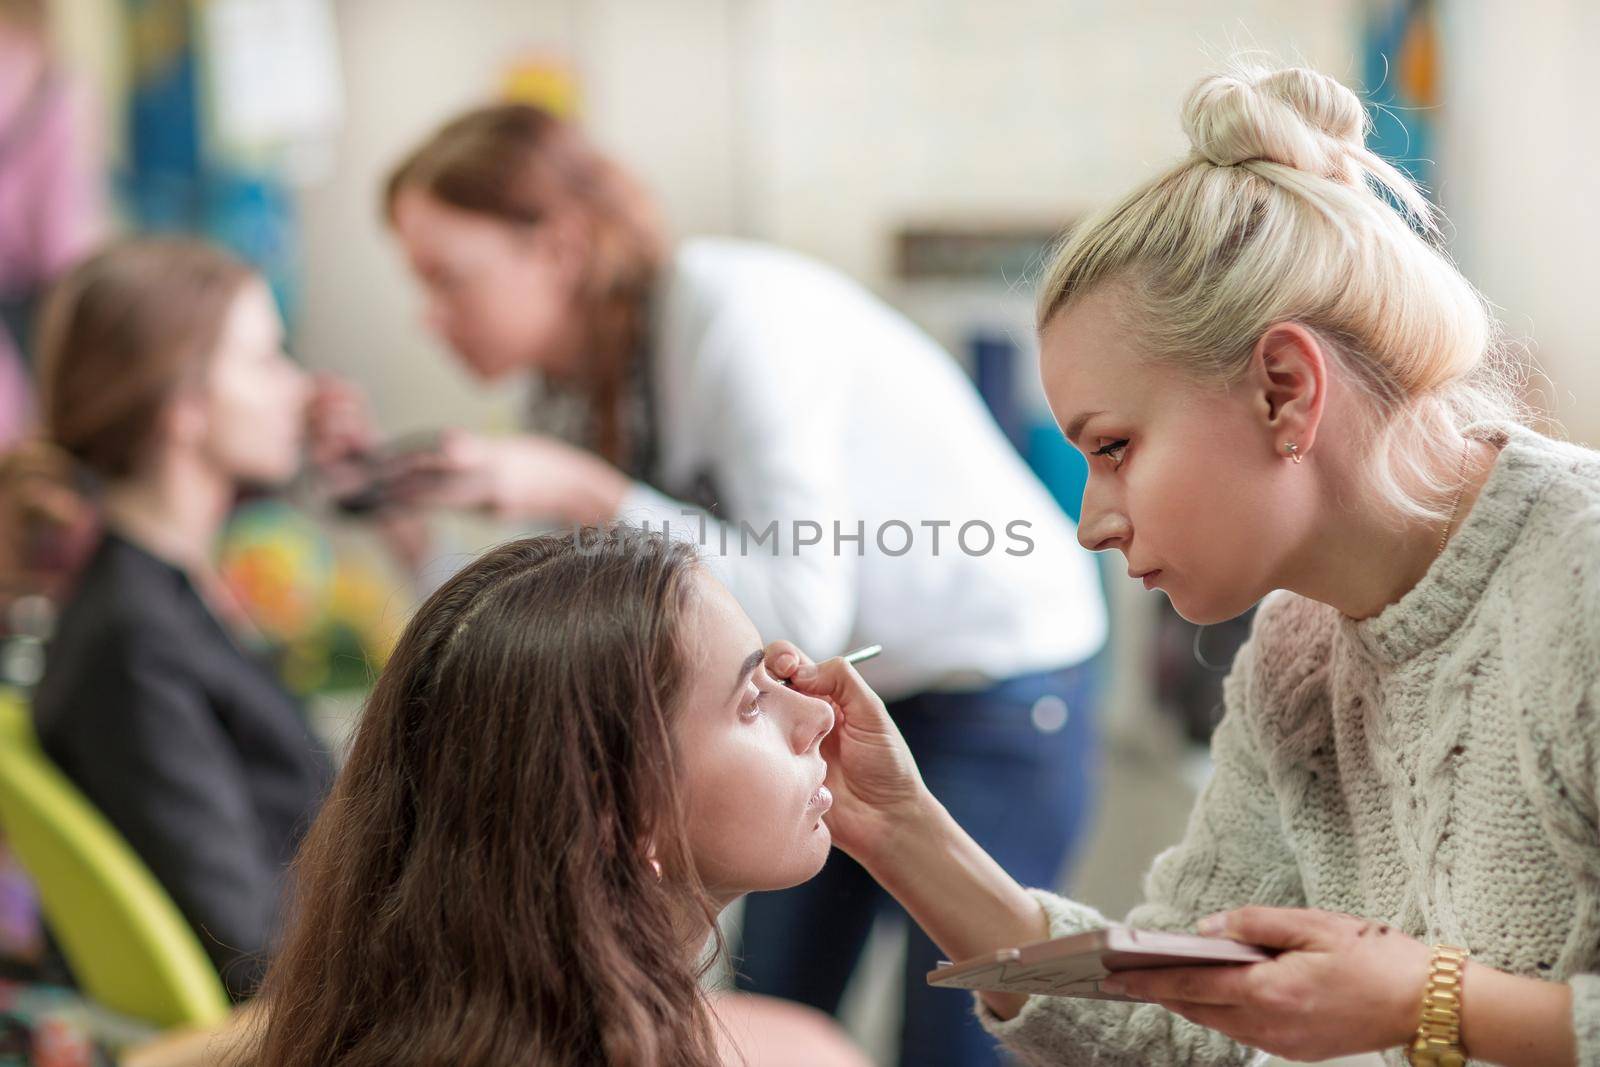 professional makeup artist does make-up for a client in a beauty salon. the concept of lifestyle